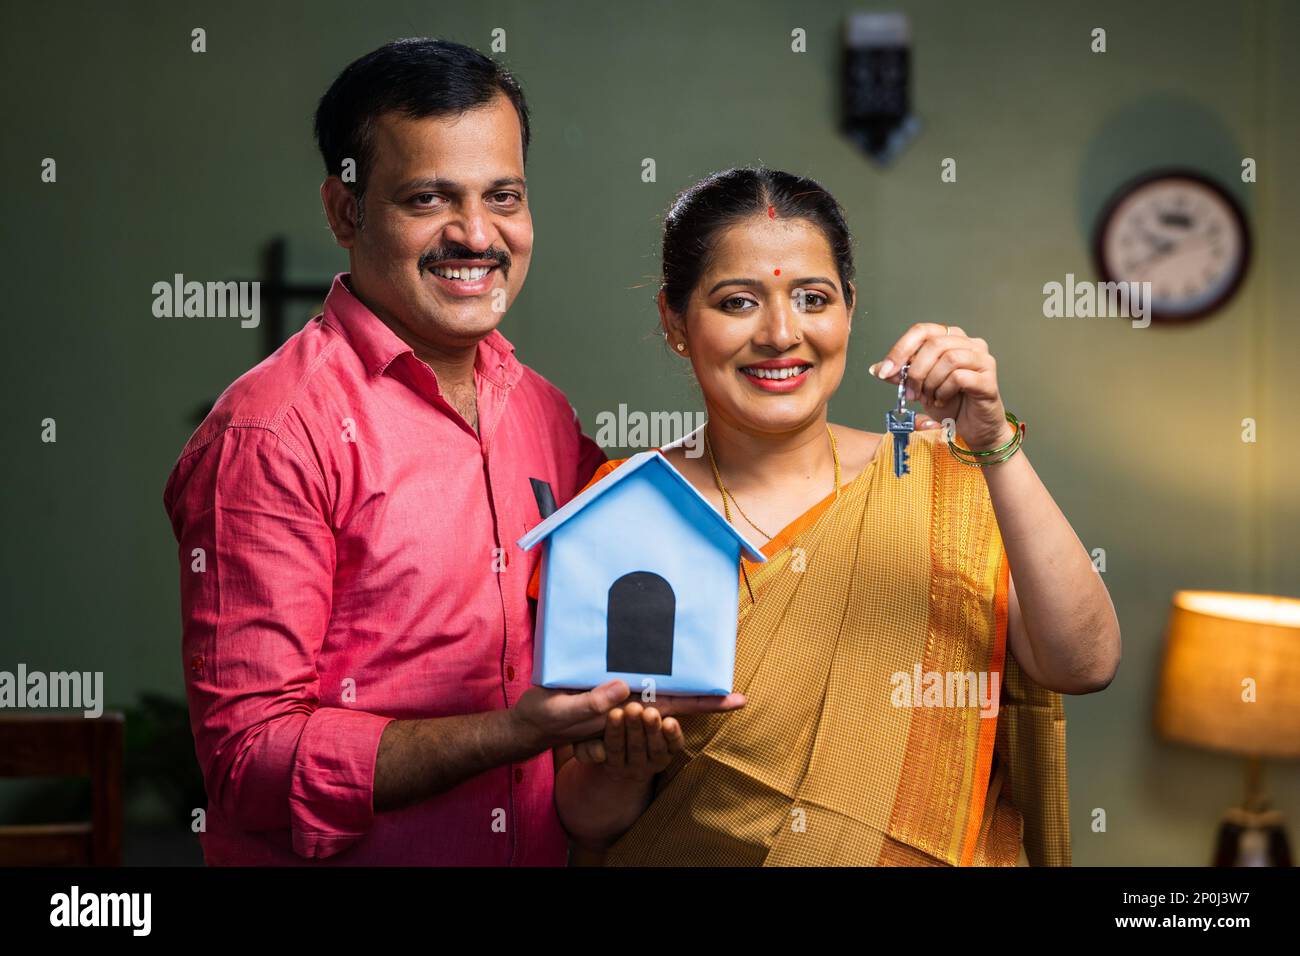 Happy smiling couple showing new house keys by toy home while looking camera - concept of new home purchasing, home loan and investment. Stock Photo